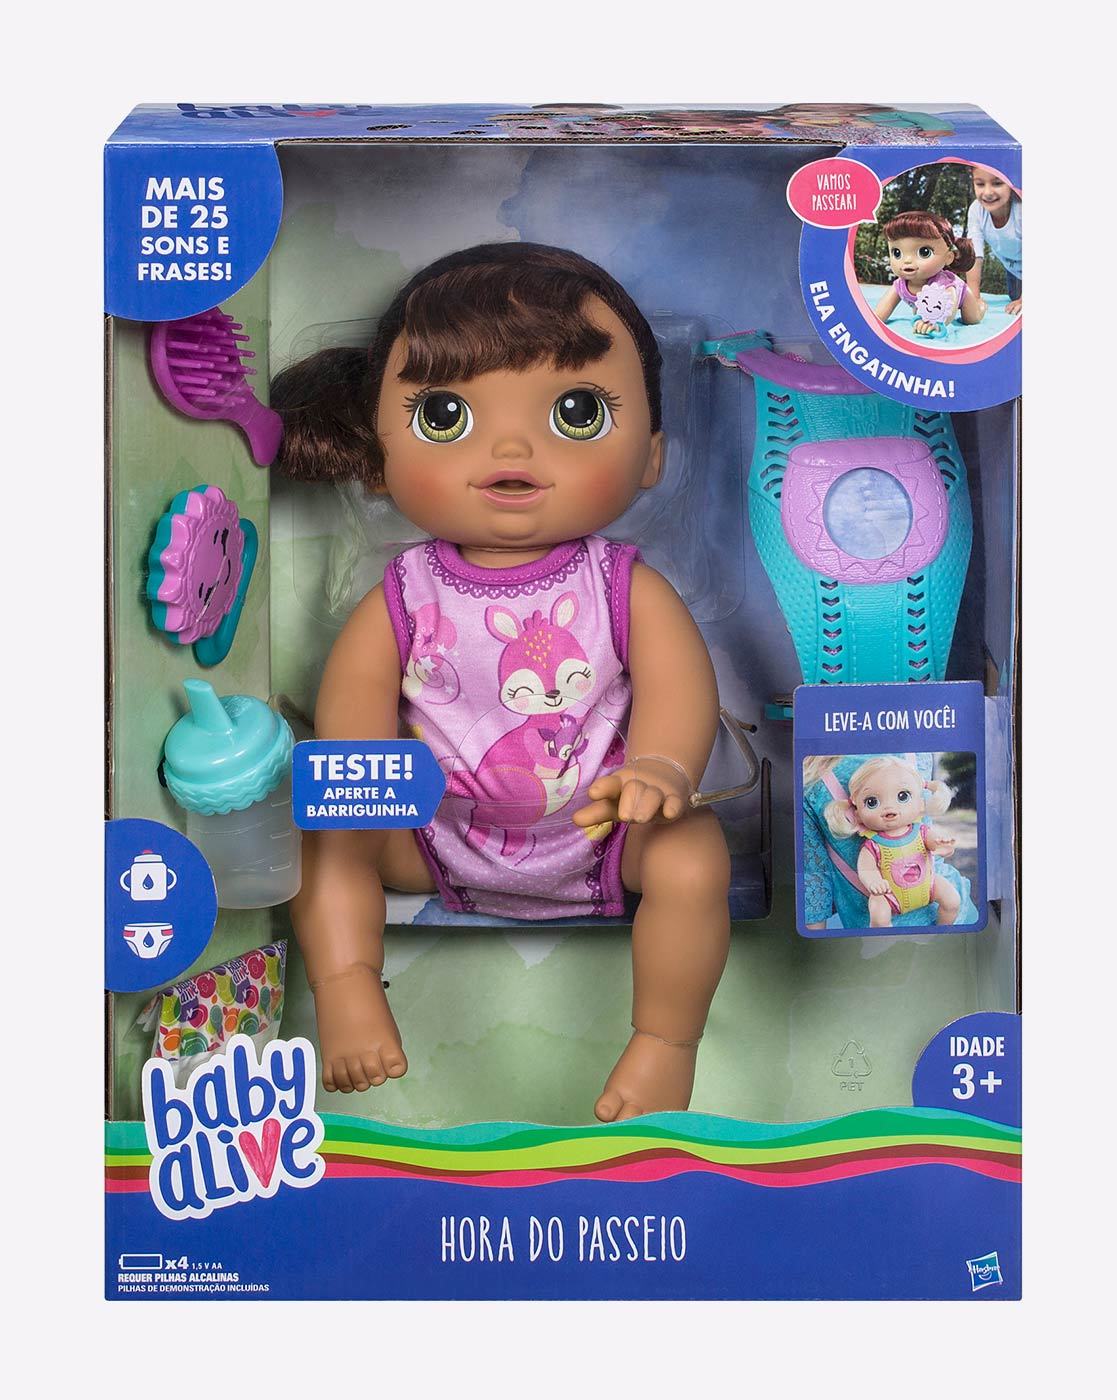 where to buy baby alive dolls